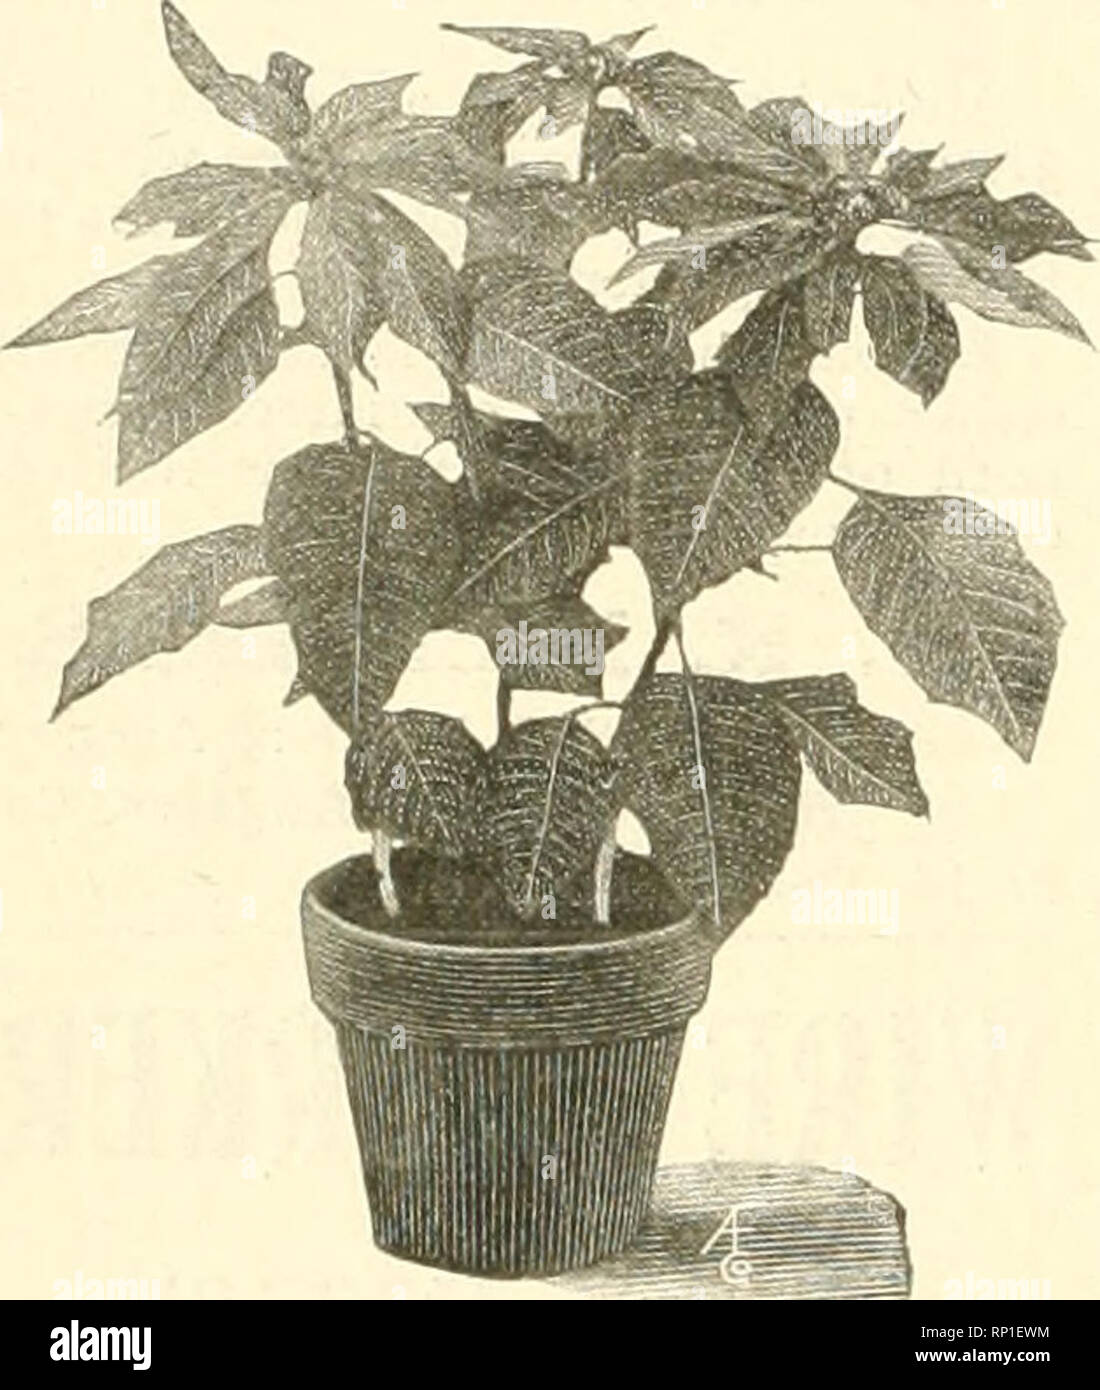 . The American florist : a weekly journal for the trade. Floriculture; Florists. CHRISTM And Other Decorative Sto«h BUY WITTBQ It will surely please you both you and your customers. We hv and are offering them while they last t Bedding Plant Pteris 'Wilsonl,. SOLANUM ACULEATISSIMUM. 6-in., strong plants 50c each Primula Sinensis, 4-in $1.50 per doz. Primula Sinensis, 3-in 1.00 per doz. TRADESCANTIA VARIEGATA. (Wandering: Jew.) 2-in 40e per doz.; §3 per 100 POINSETTIAS POINSETTI.S •5 in., 3 and 4 in pot % .50 each 7 in 75 each S in 1.00 each X-M.S White, 4 ii BLOOMING HYACINTHS. .¥2.00 per do Stock Photo